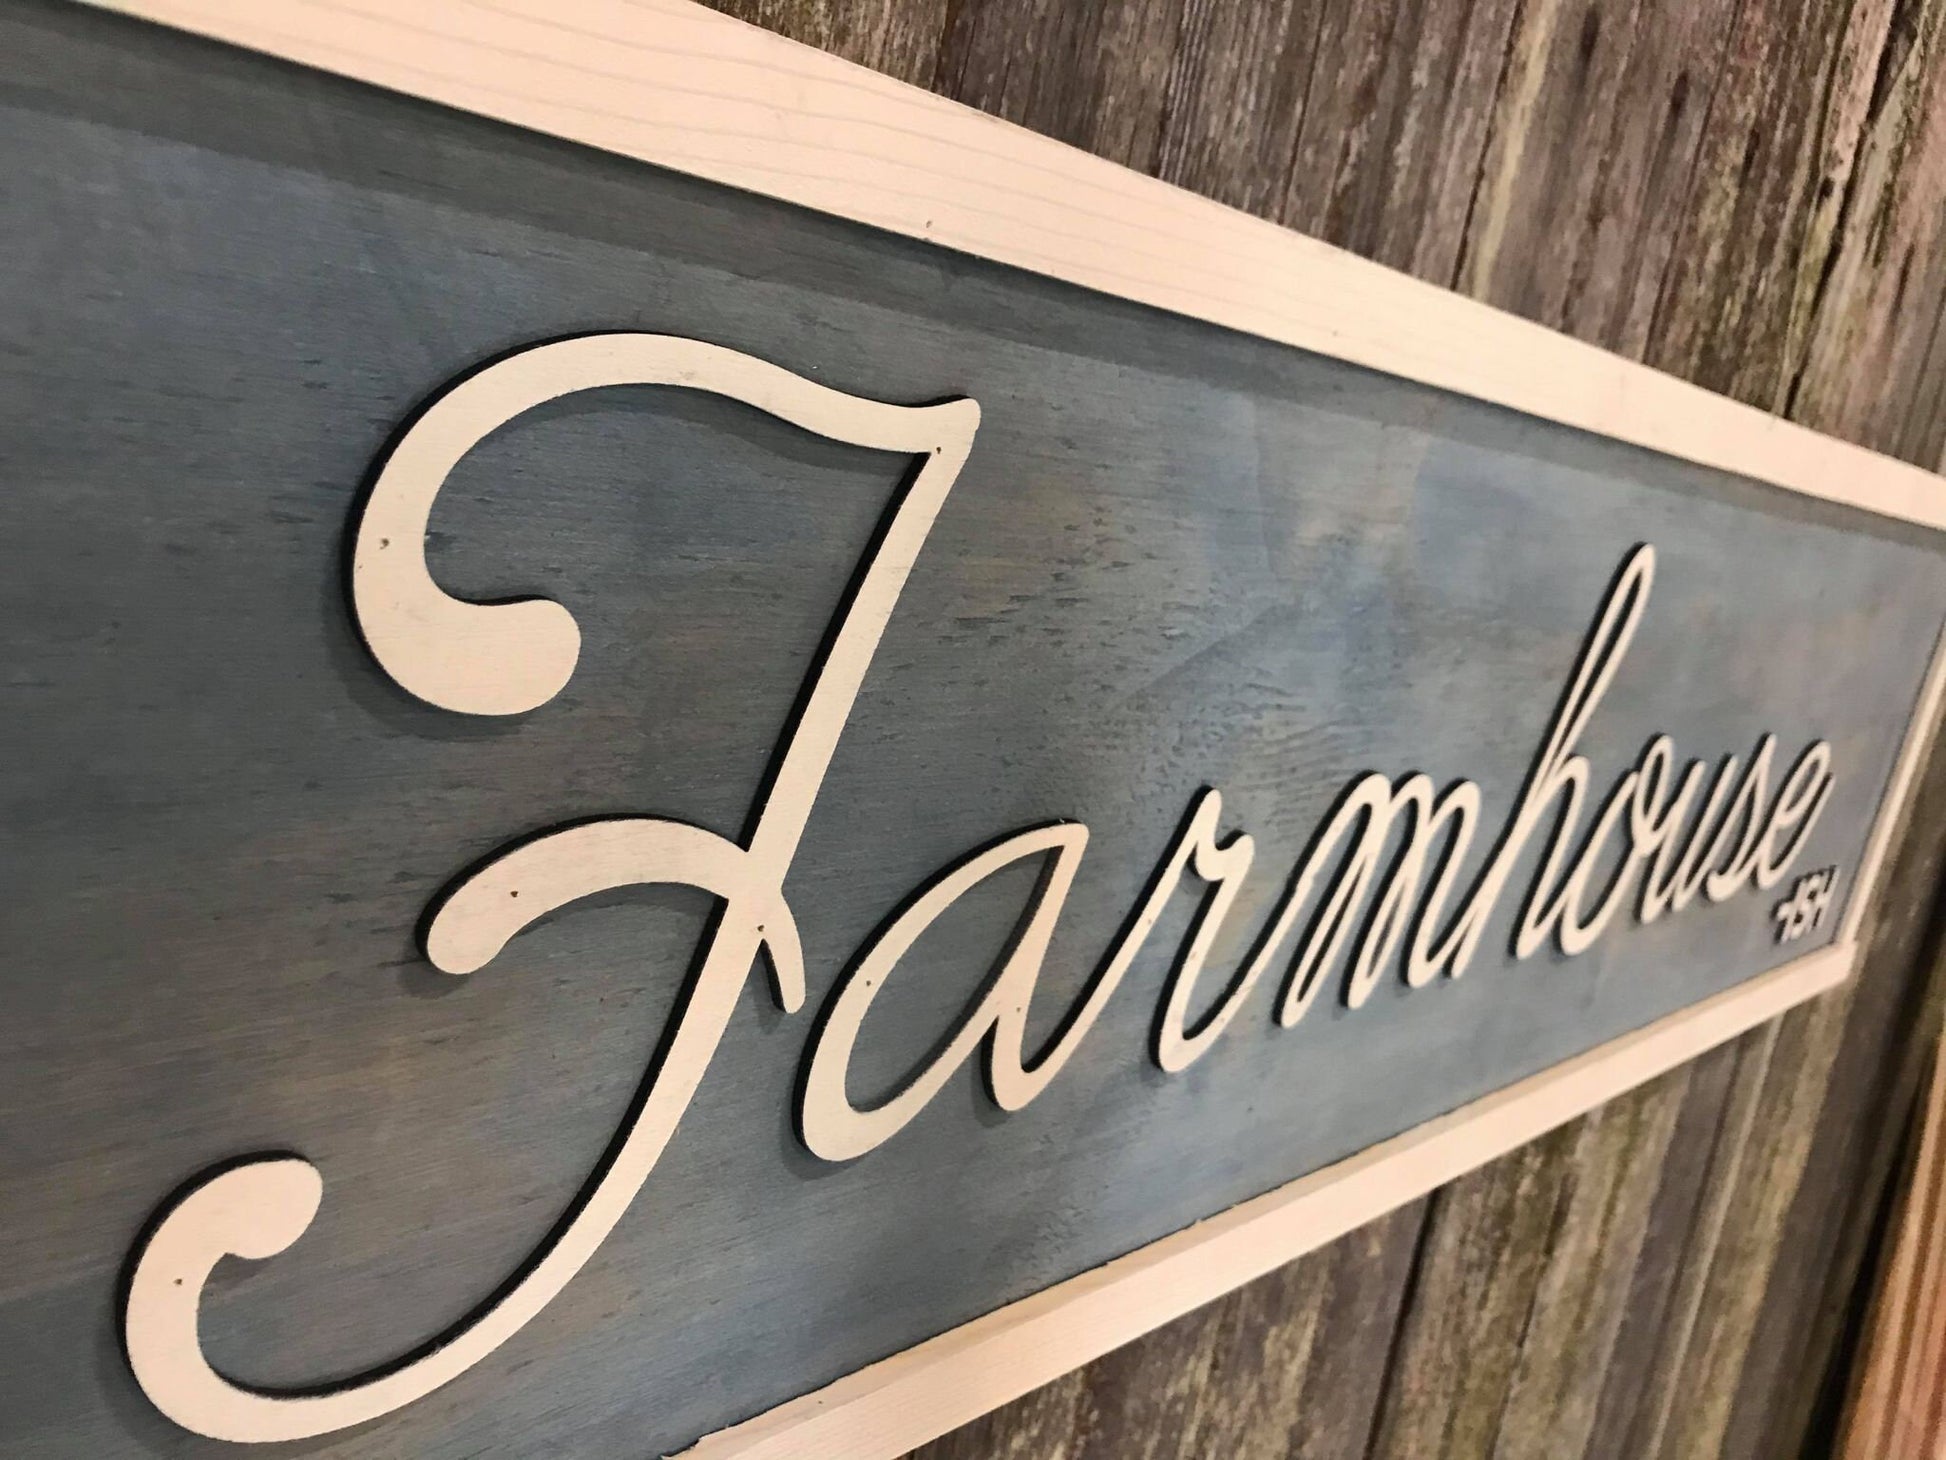 Farmhouse Farmhouse-Ish Sign Blue White Wood 3D Raised Text Country Rustic Primitive Wall Decor Shabby Chic Wall Art